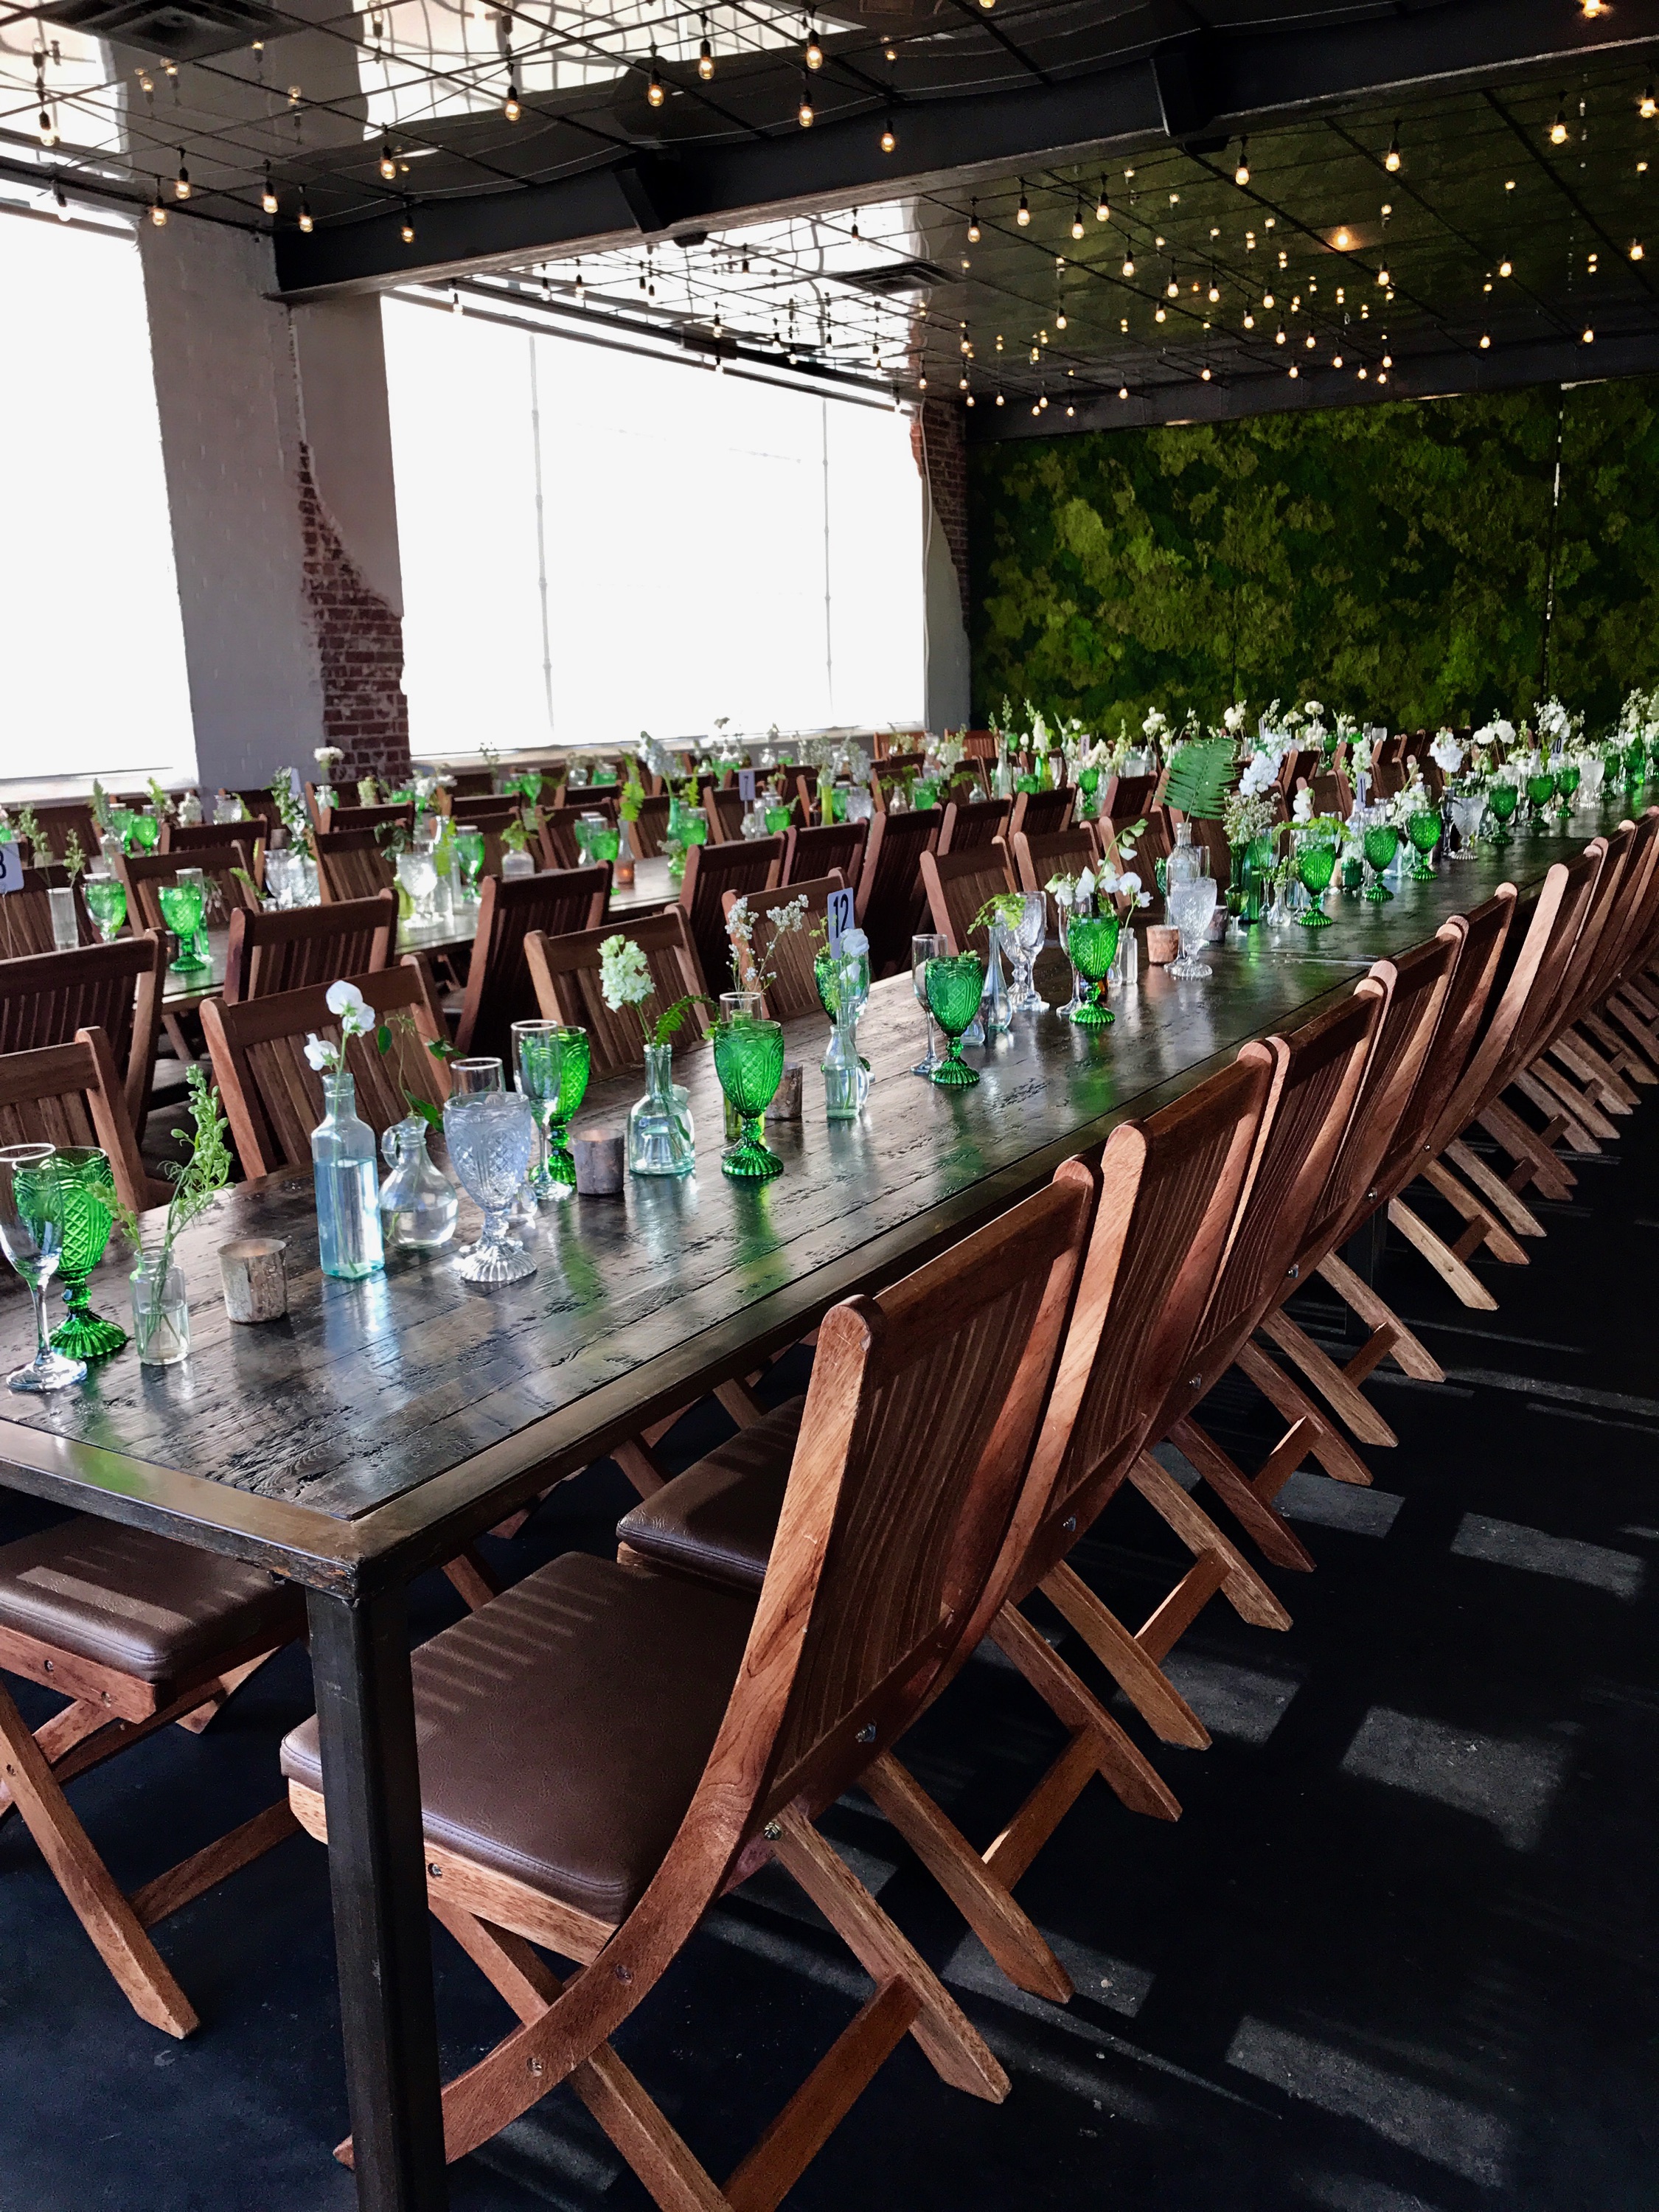 Moss green goblets feasting tables wedding reception